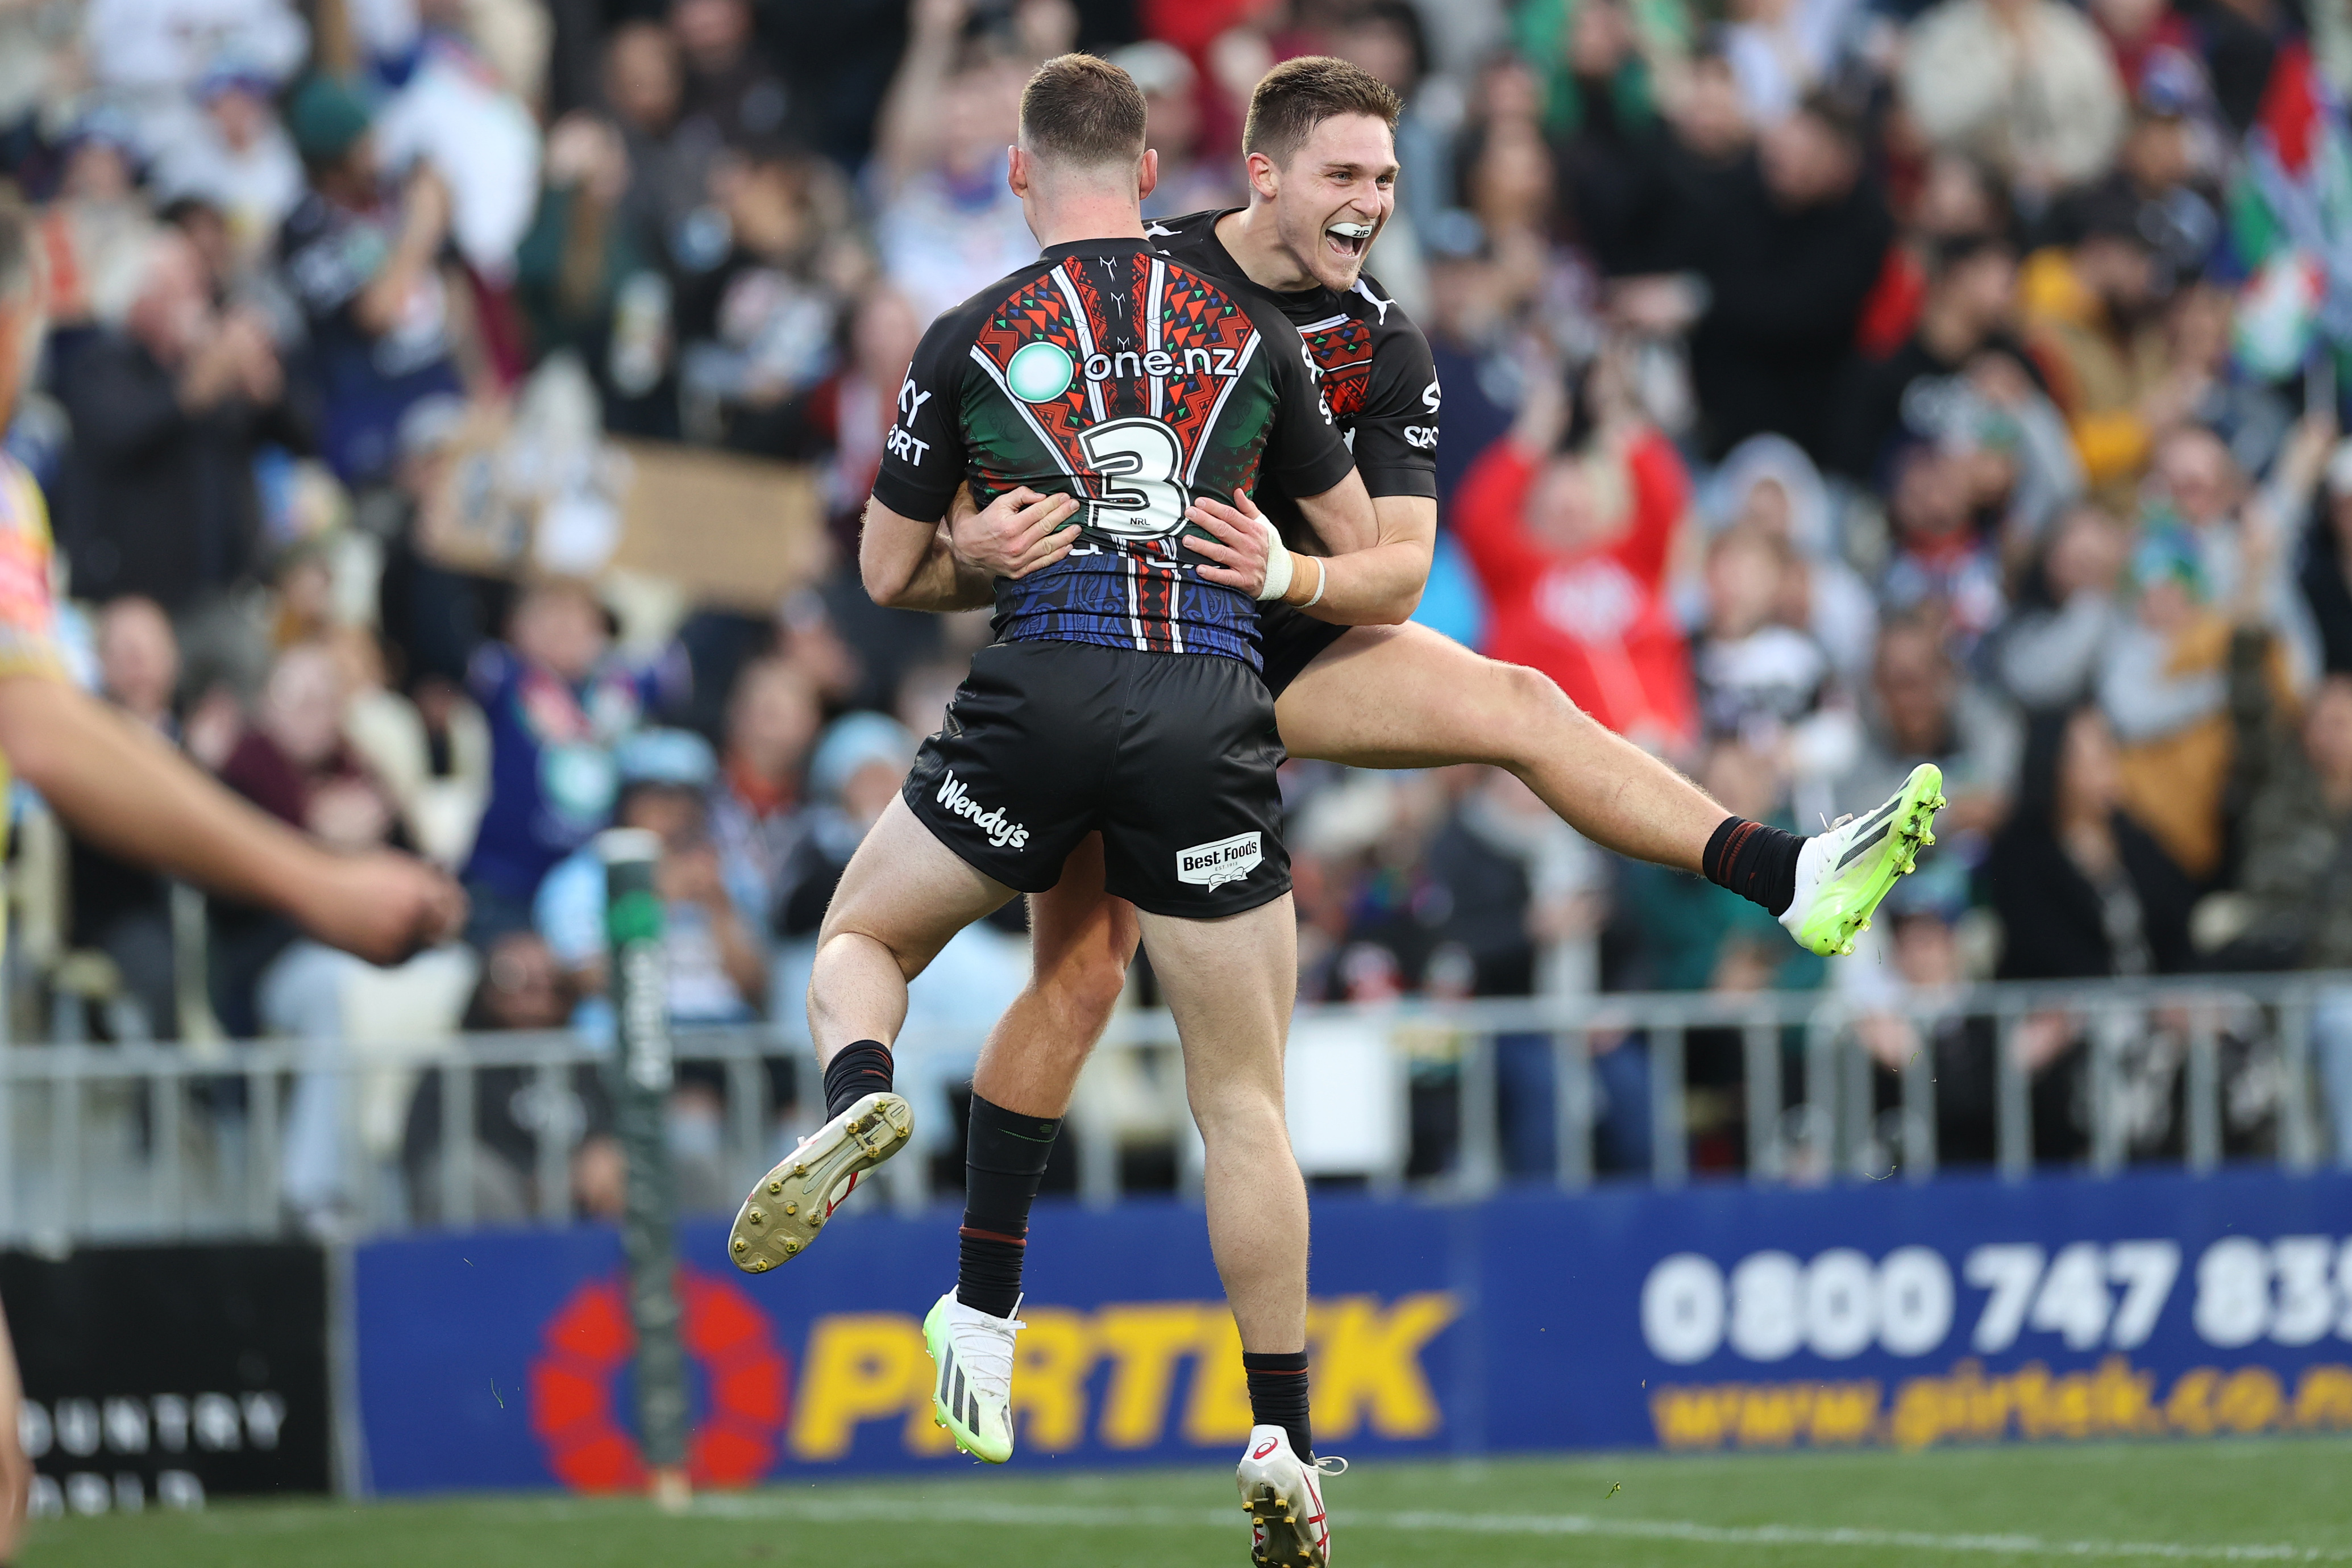 The best NRL tries from the New Zealand Warriors